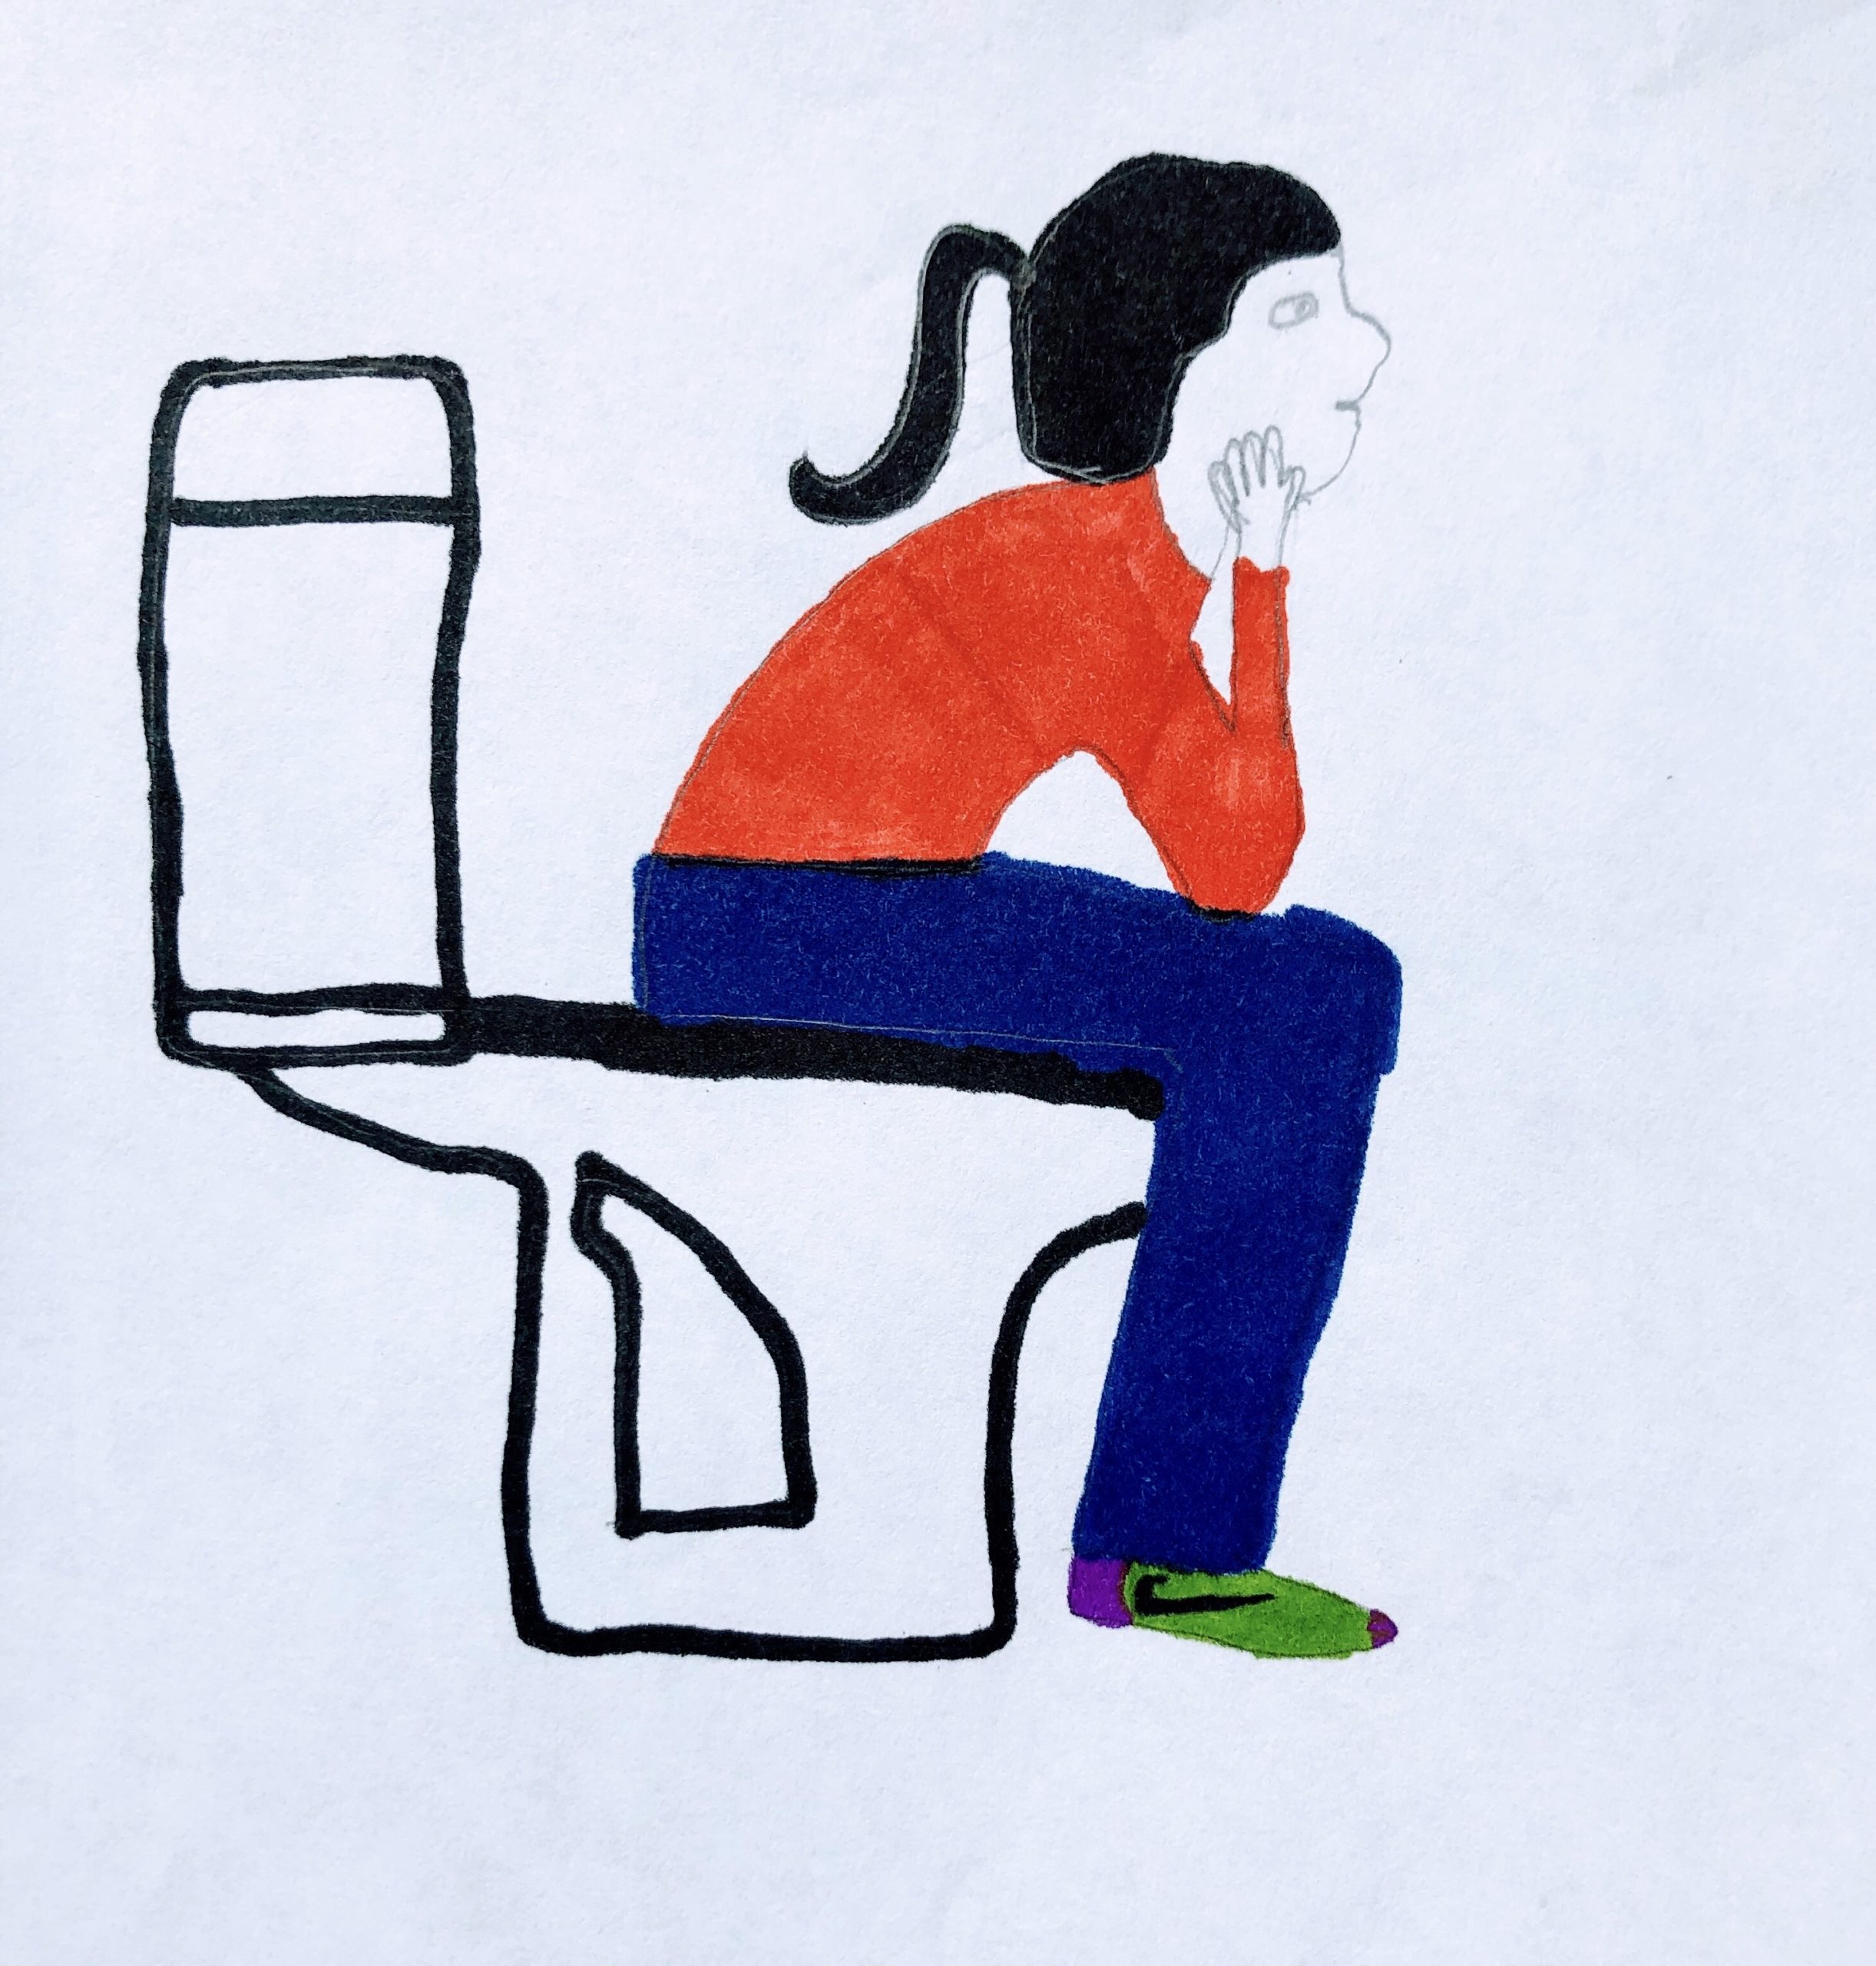 Drawing of a dark haired girl with blue pants and a red shirt, sitting on a toilet thinking in the children's story, The Night I Got Locked in the Bathroom.